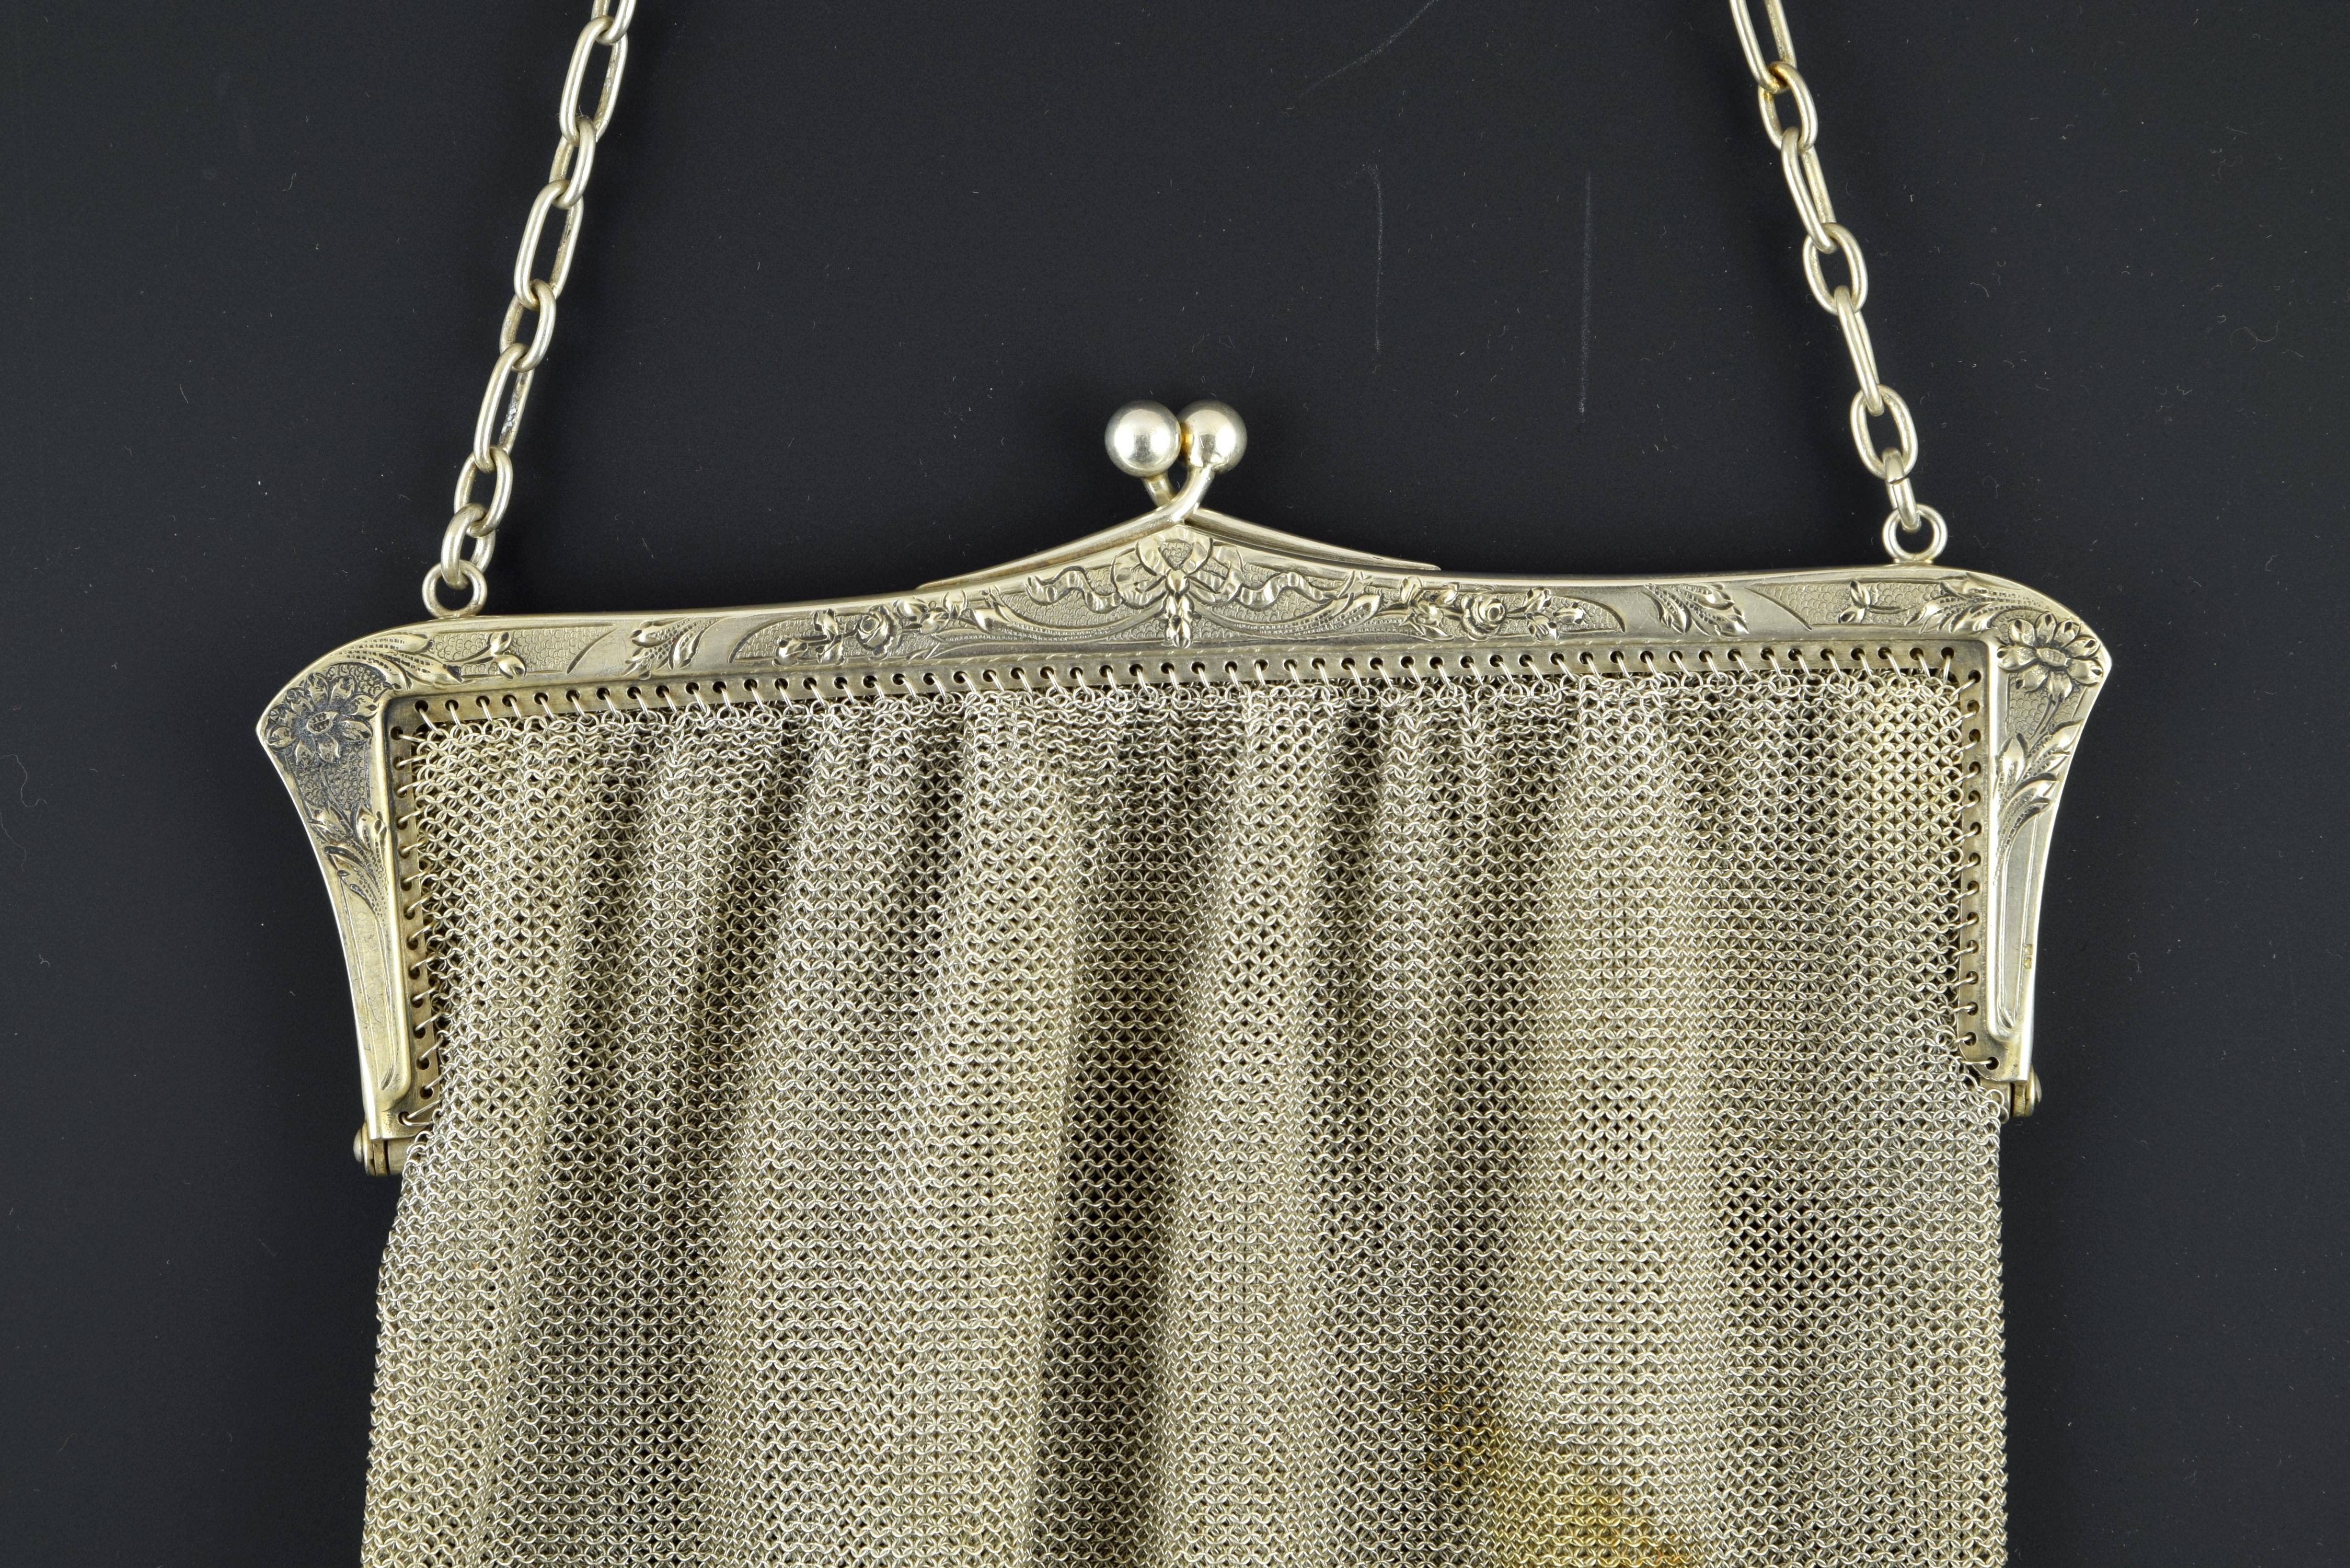 Silver mesh bag in its color decorated with triangular elements on the bottom that has a smooth closure by hinges and a chain of alternating long and short links. This type of pieces were very frequent in the 19th century, as a luxury element and a